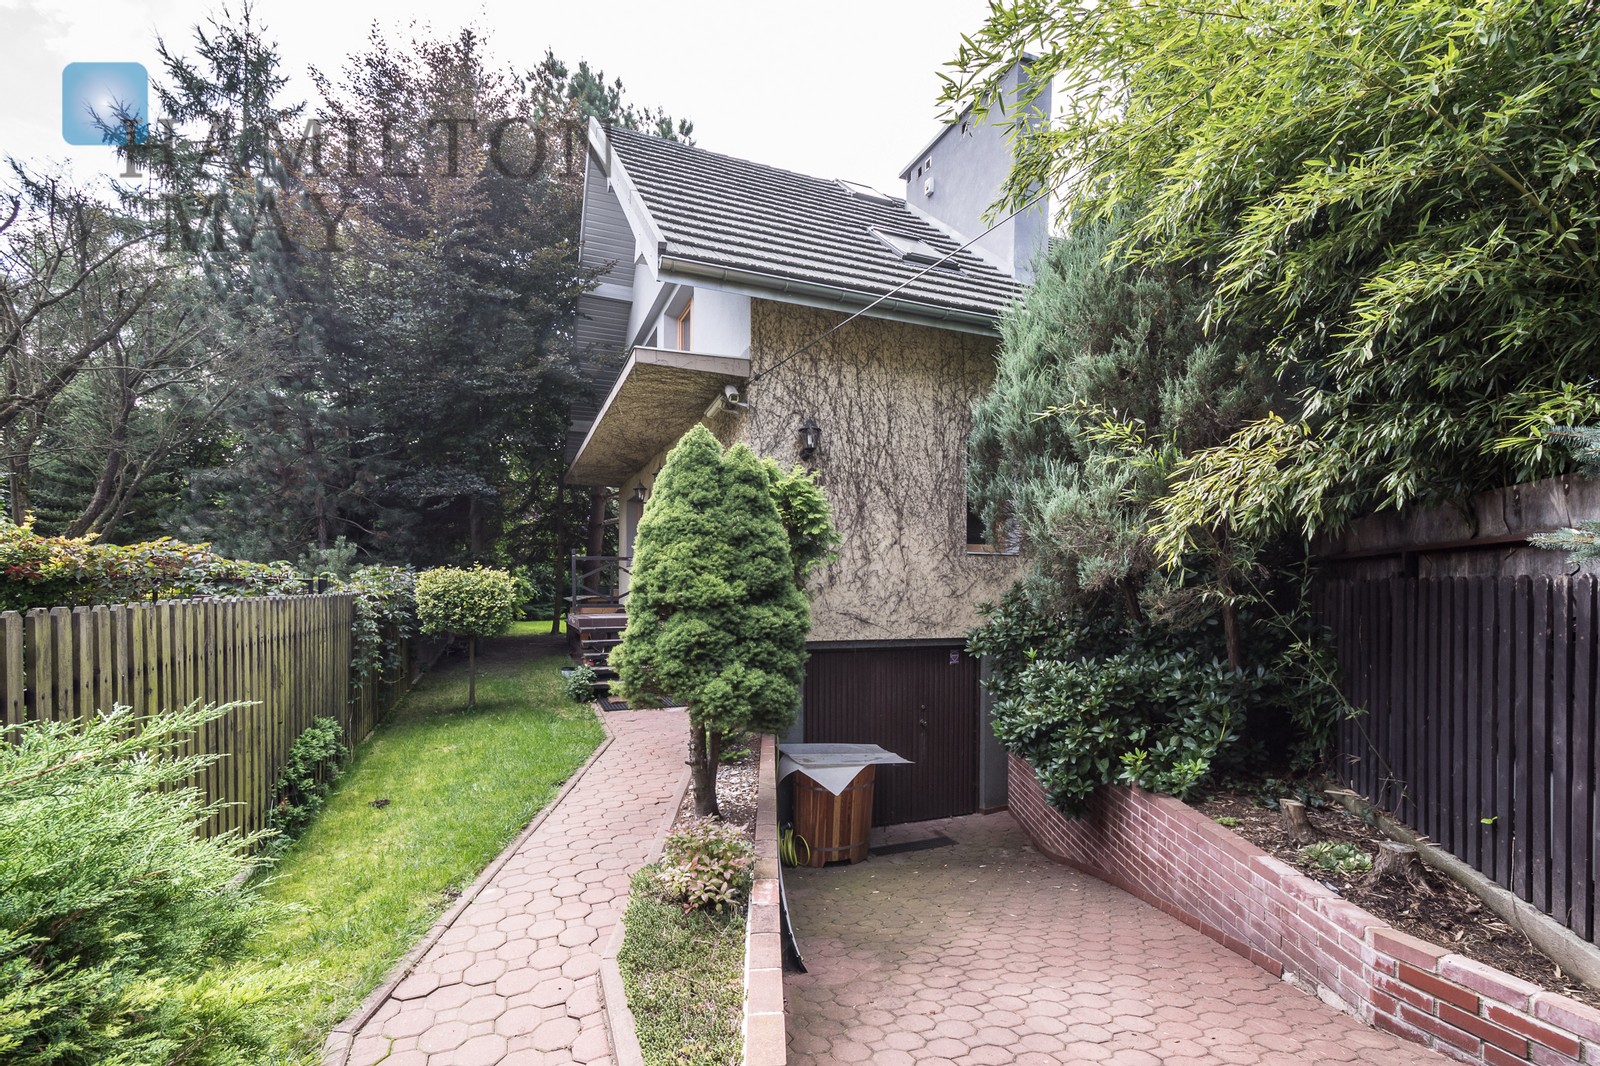 A spacious house with a large garden in the Olsza neighborhood Krakow for rent